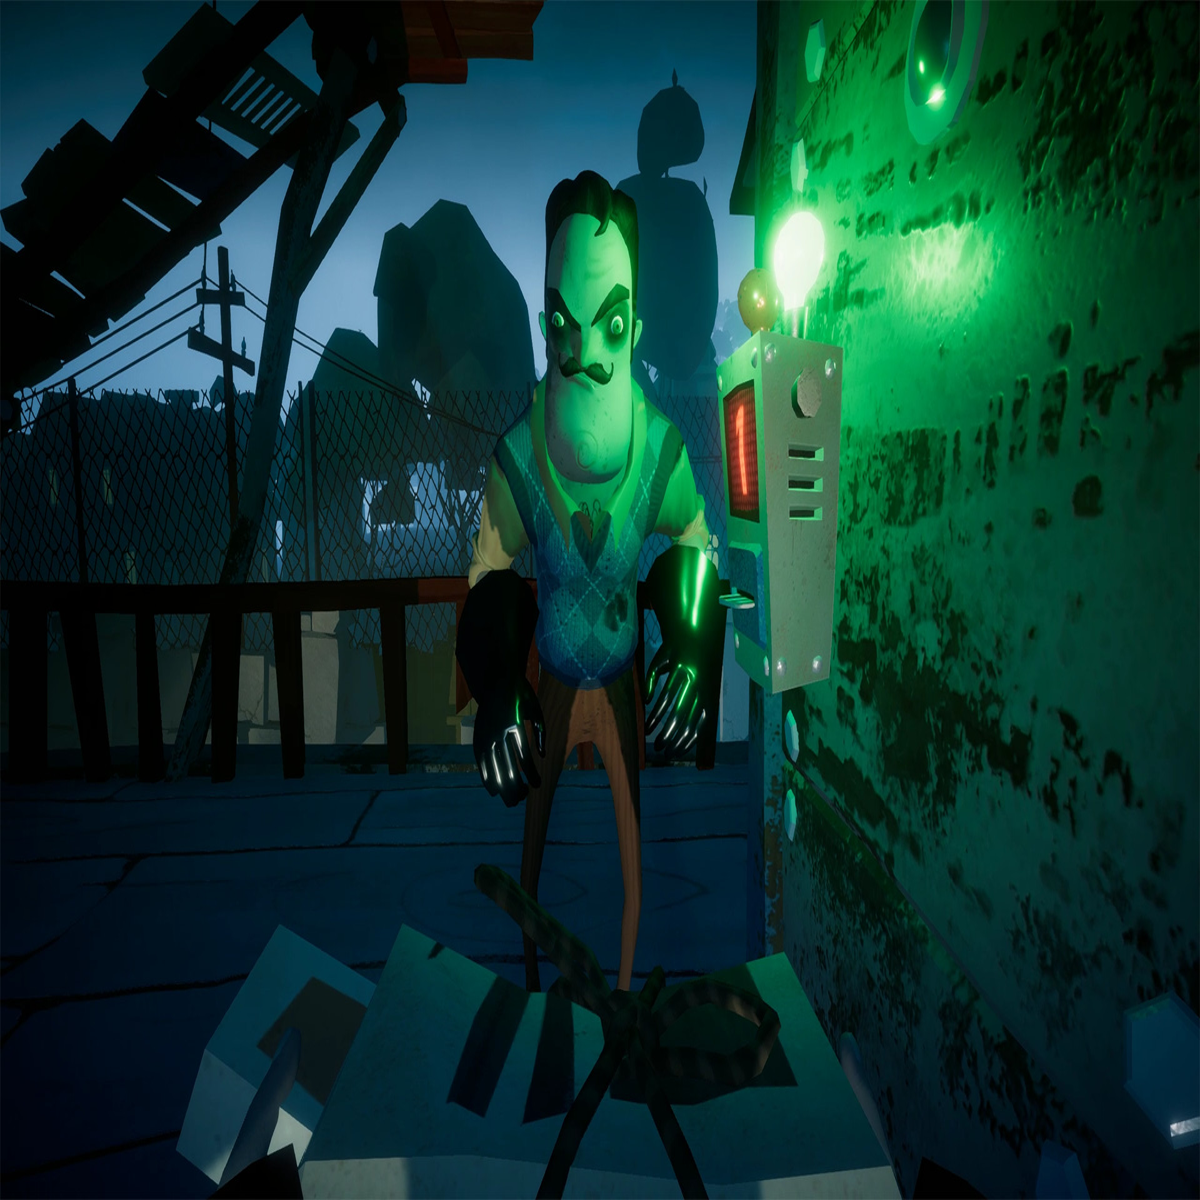 Secret Neighbor screenshots, images and pictures - Giant Bomb